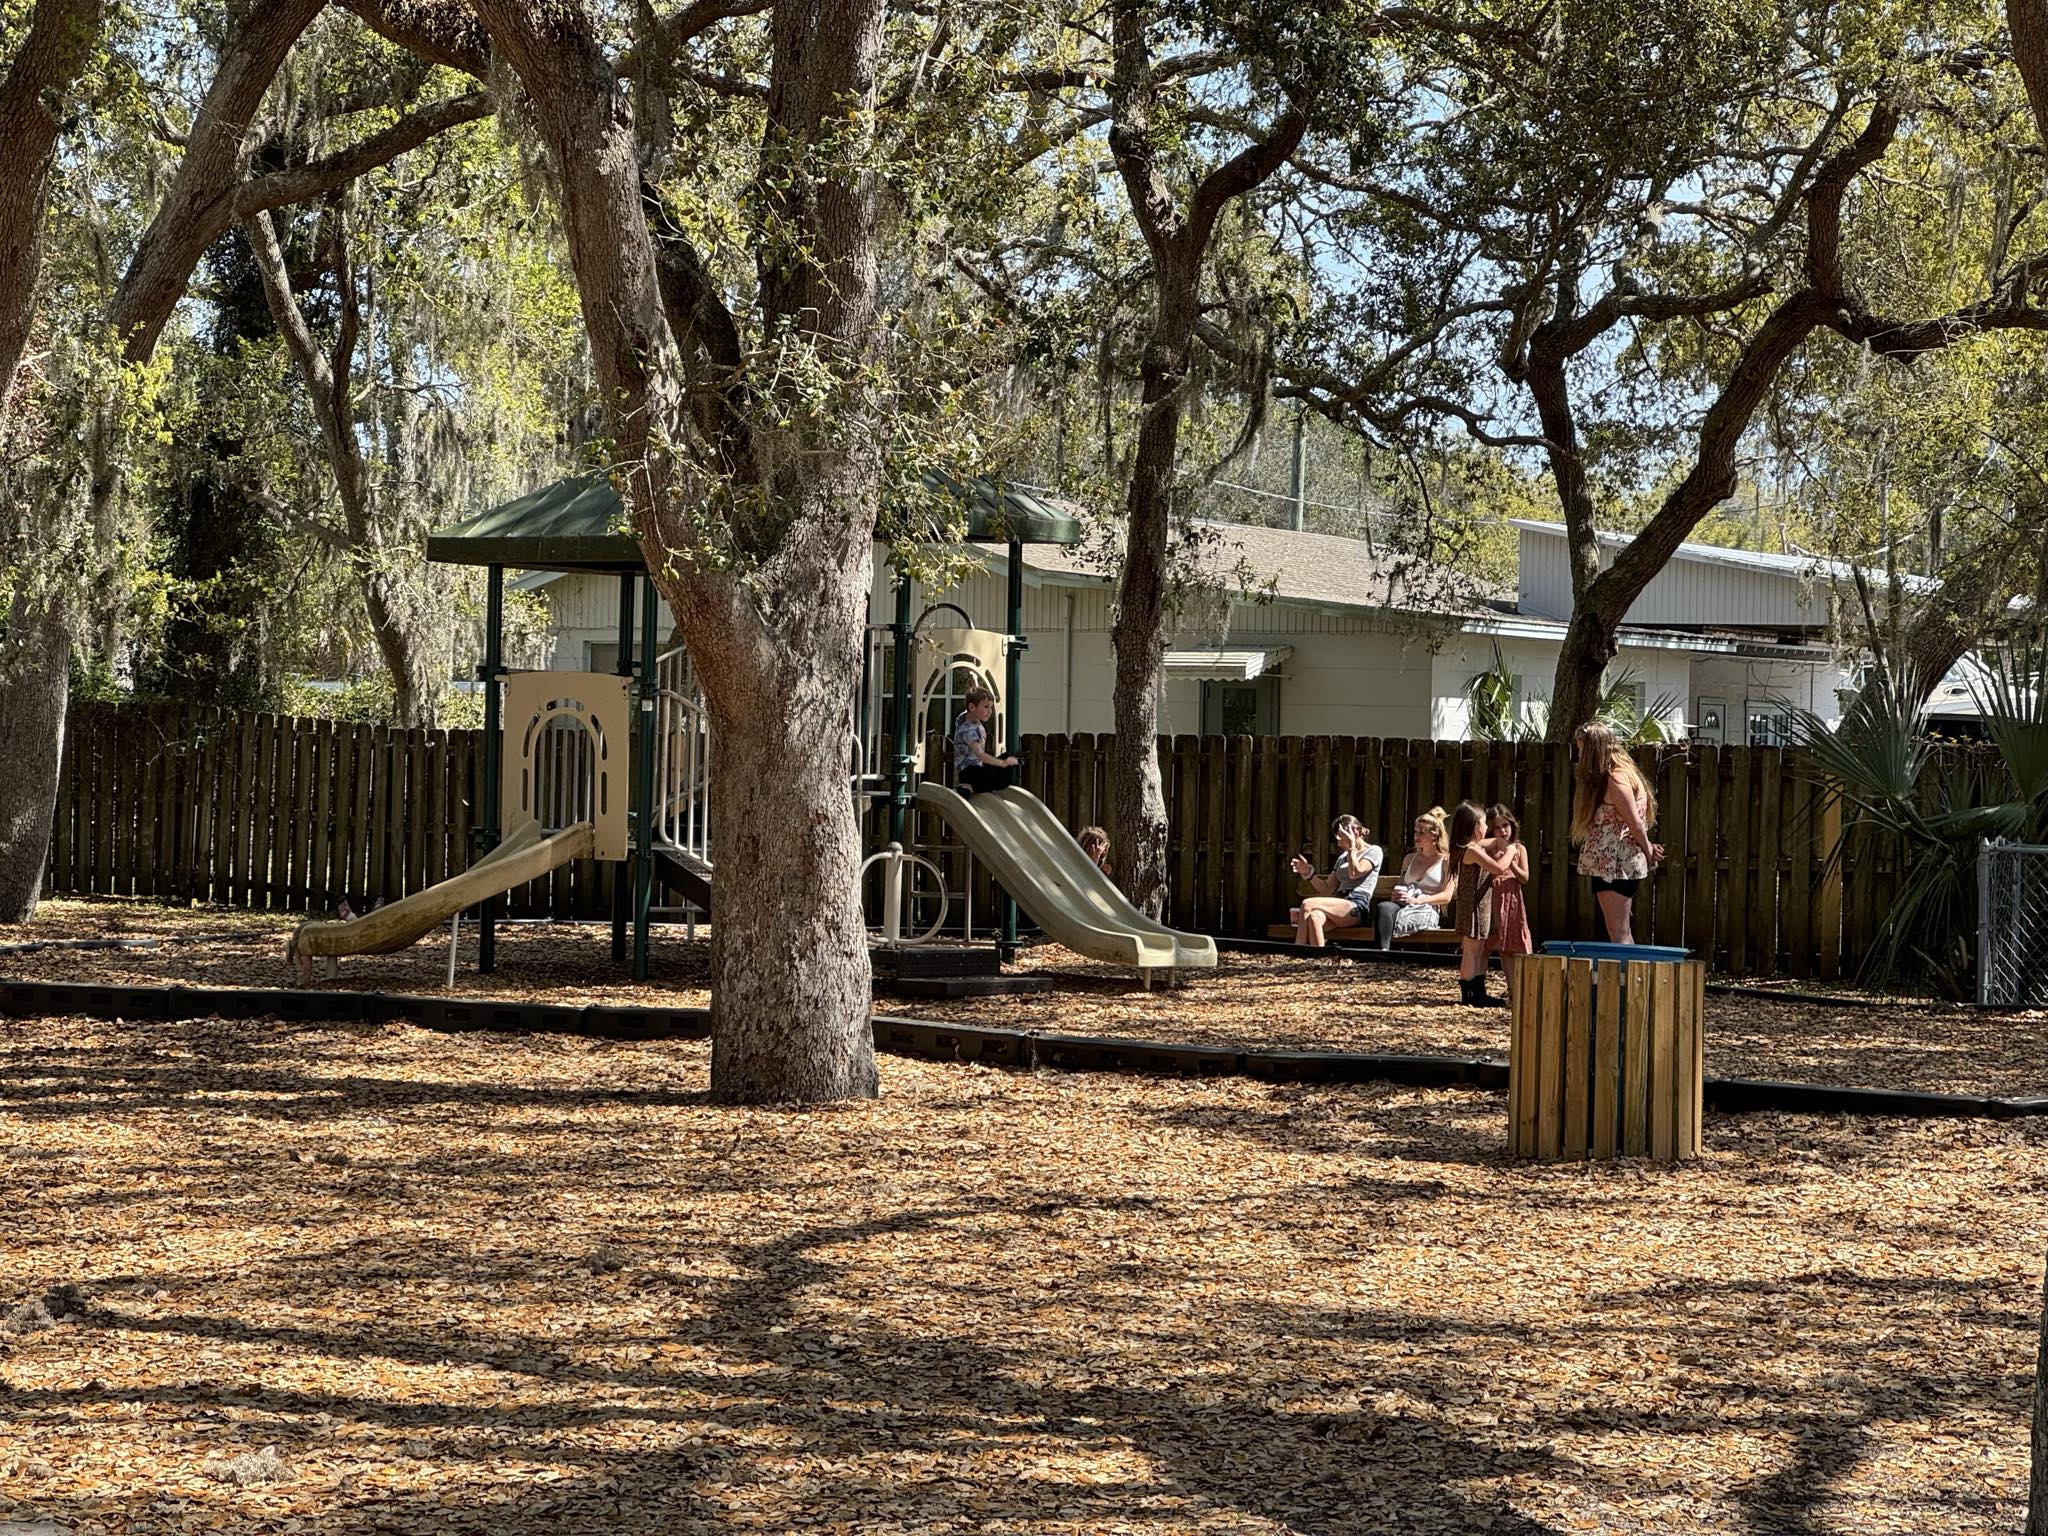 Children and parents near a playset surrounded by trees.